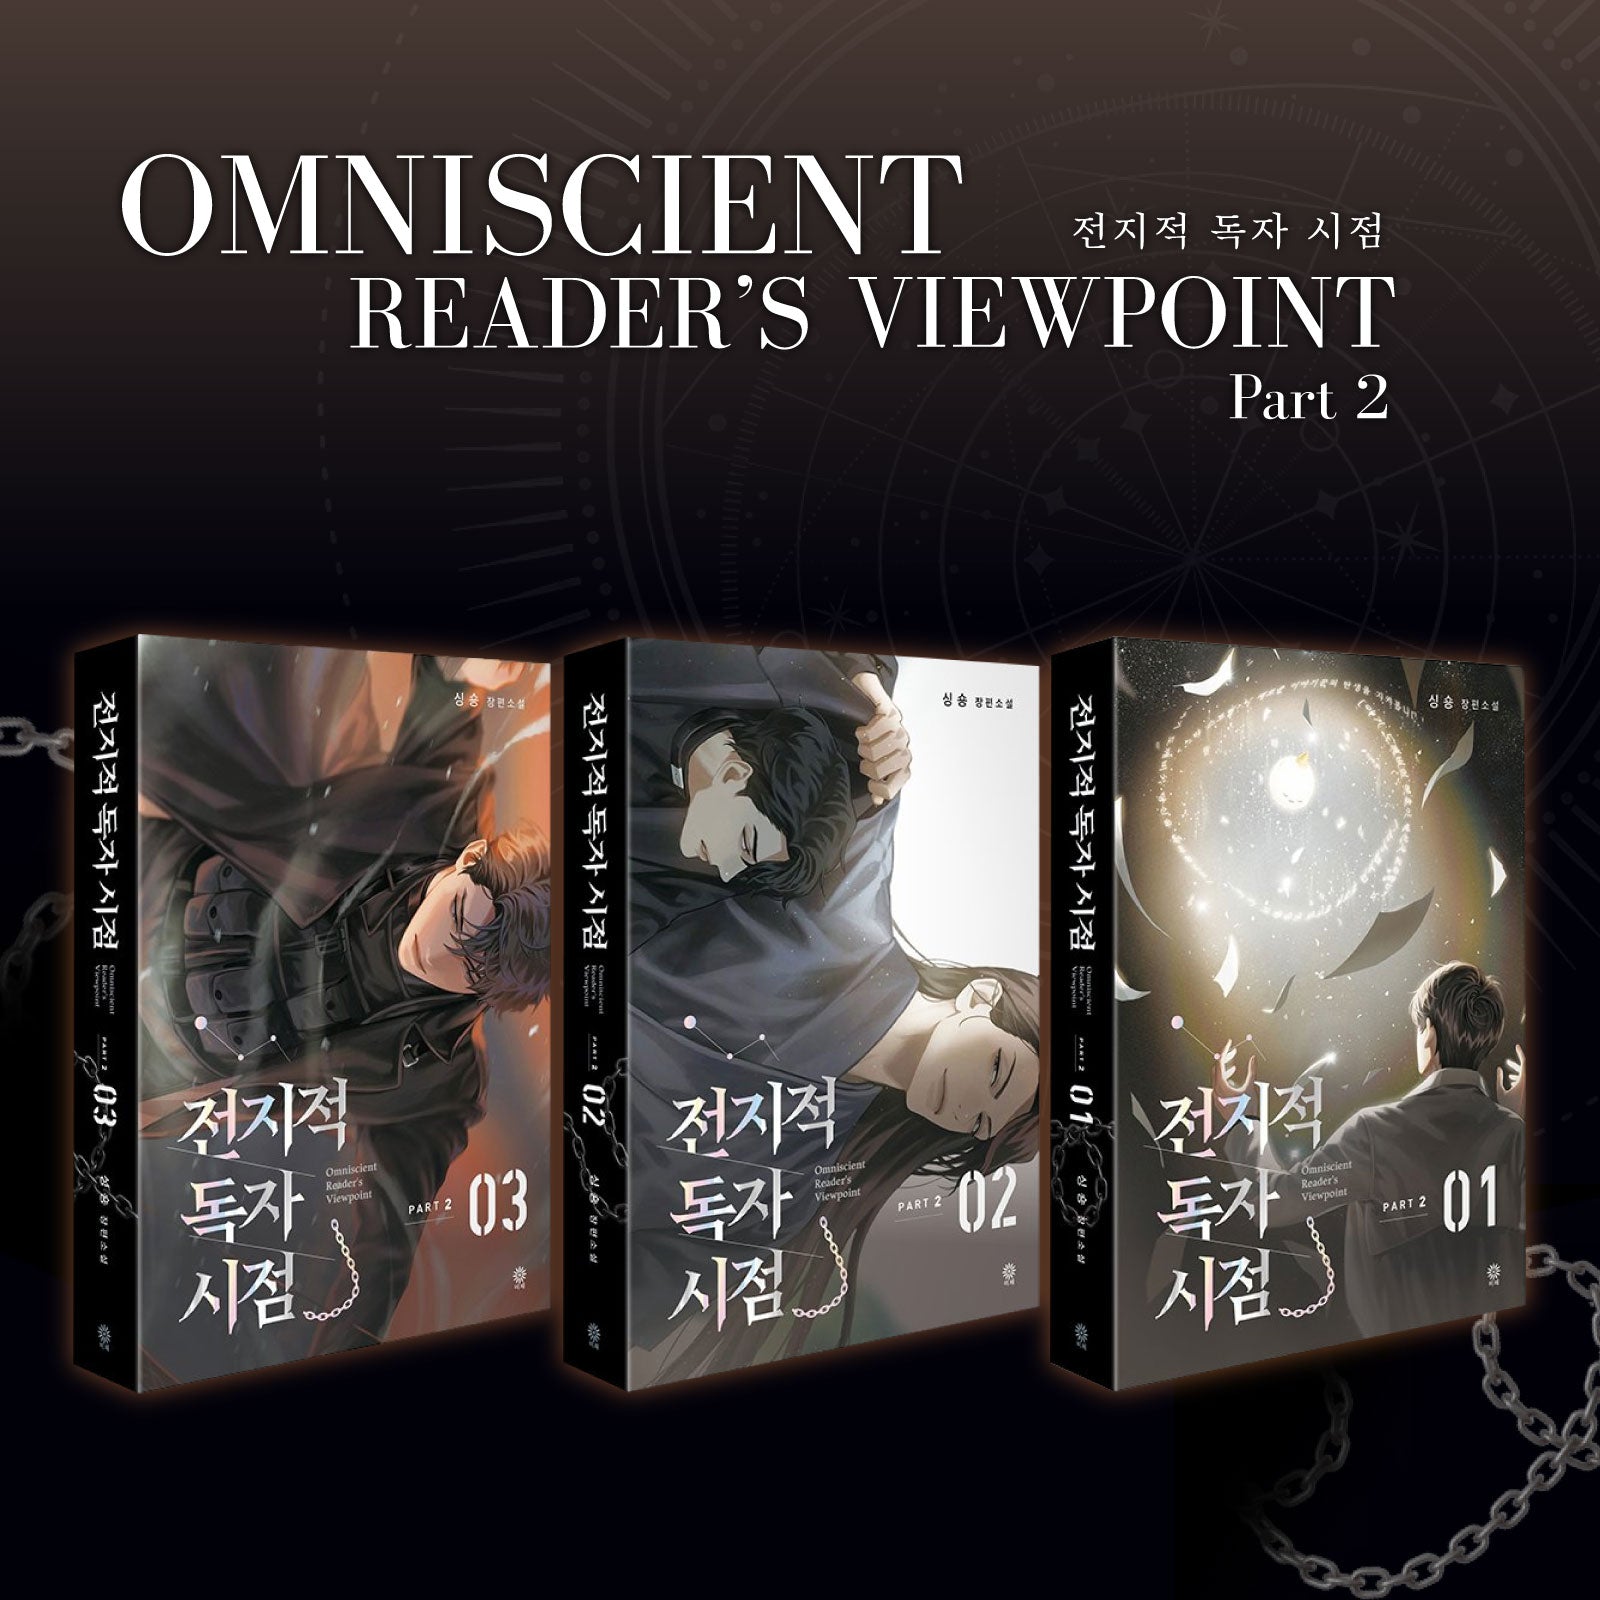 Ok so I finished reading Omniscient Readers Viewpoint (Adventure action  Book / novel (that has BL undertones) Even the creator ships them!